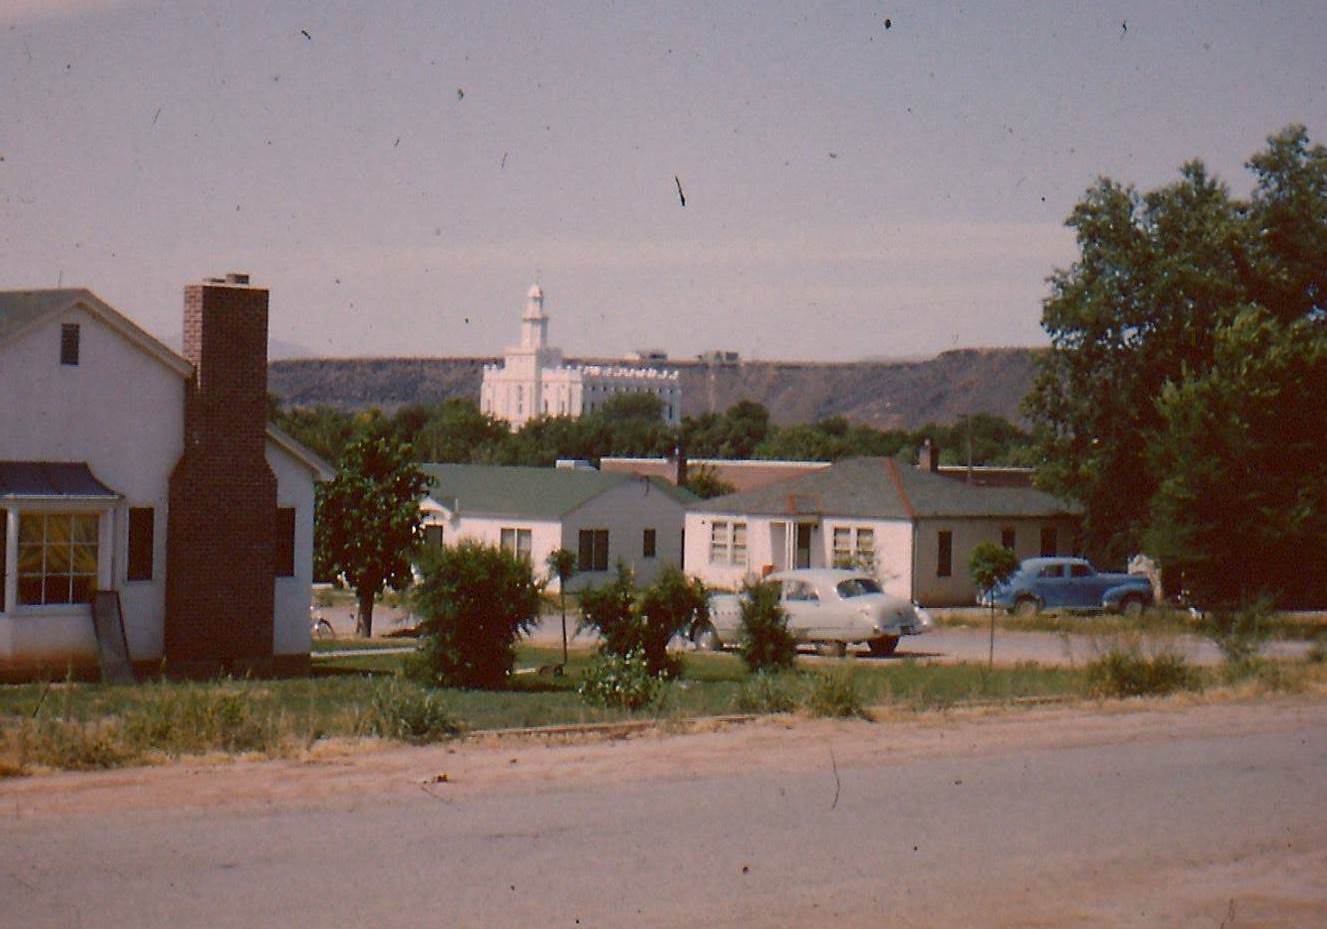 The corner of 200 South & 500 East in St. George in the 1950s